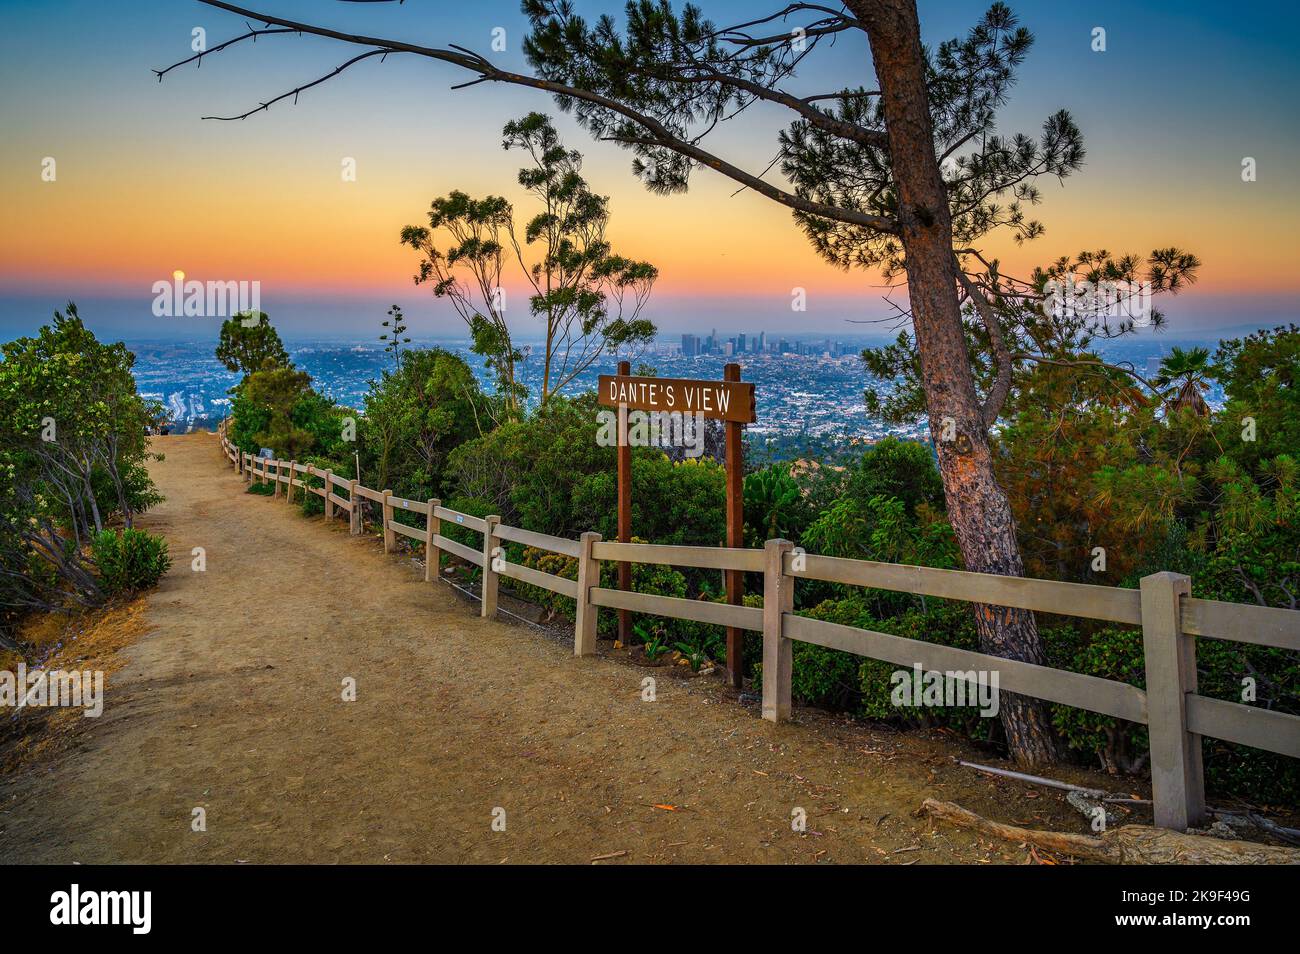 Los Angeles from Dante's View viewpoint in California photographed at sunset Stock Photo